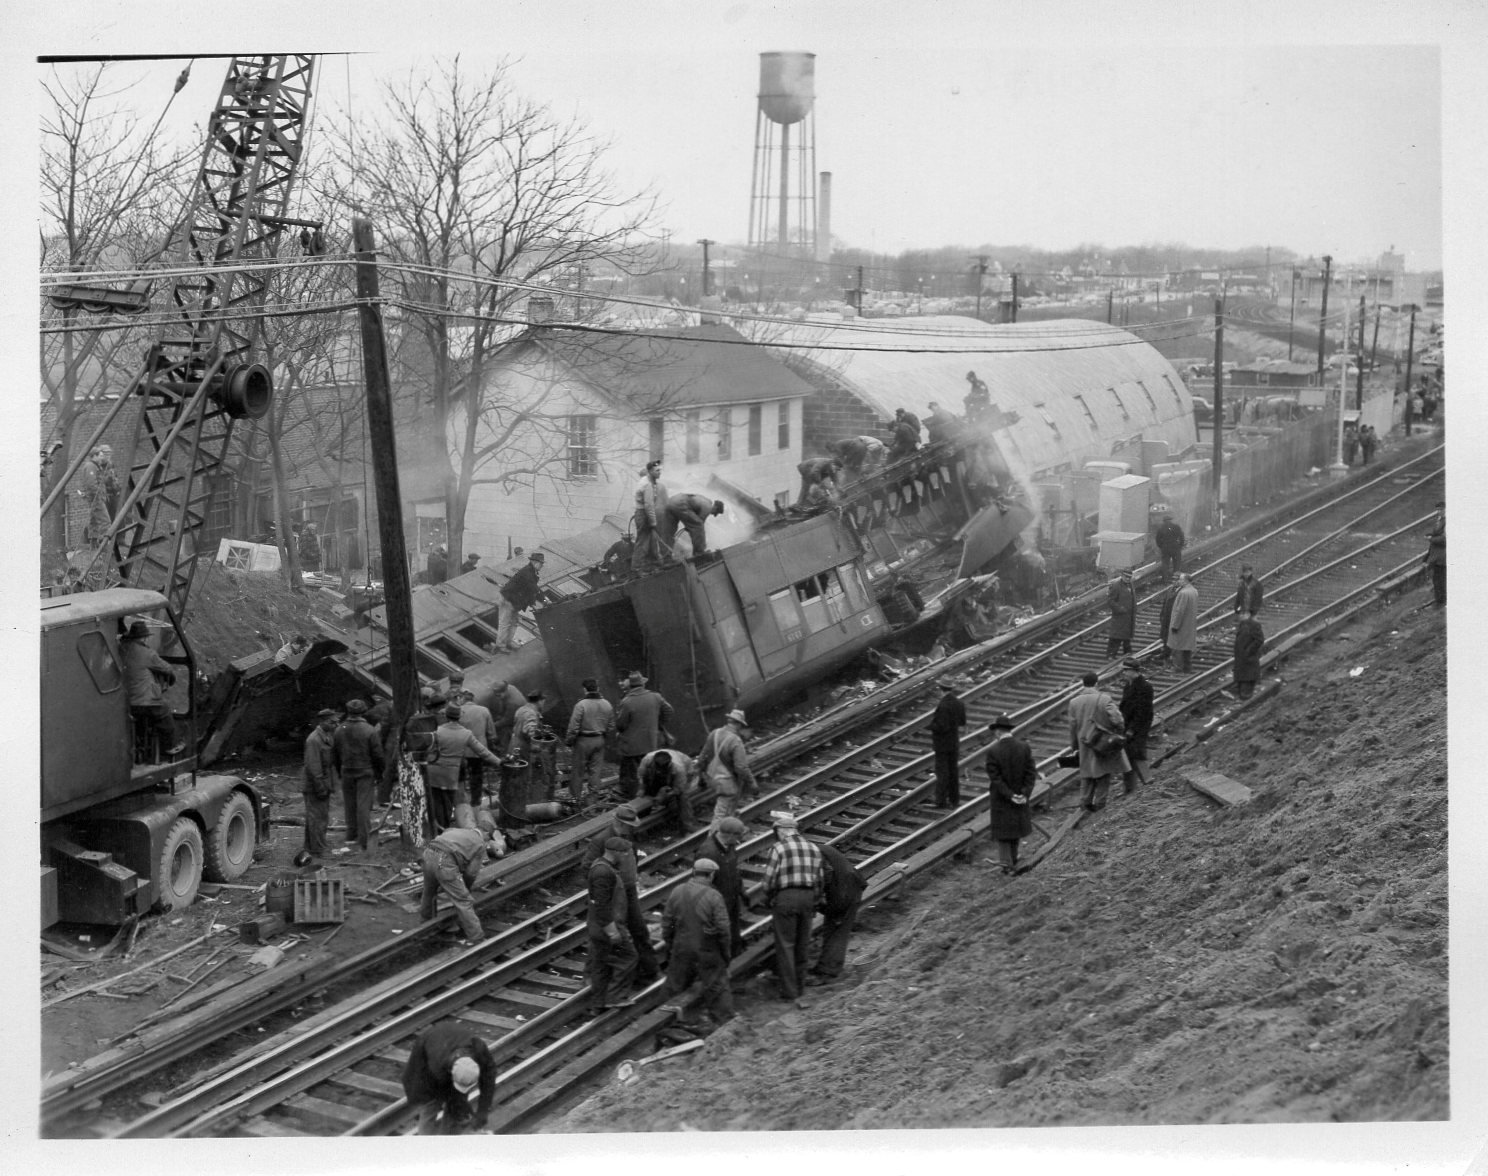 Some 29 people were killed, and more than 100 others were injured, when two Long Island Rail Road trains collided in Rockville Centre at Banks Avenue shortly after 10:30 p.m. on Feb. 17, 1950.